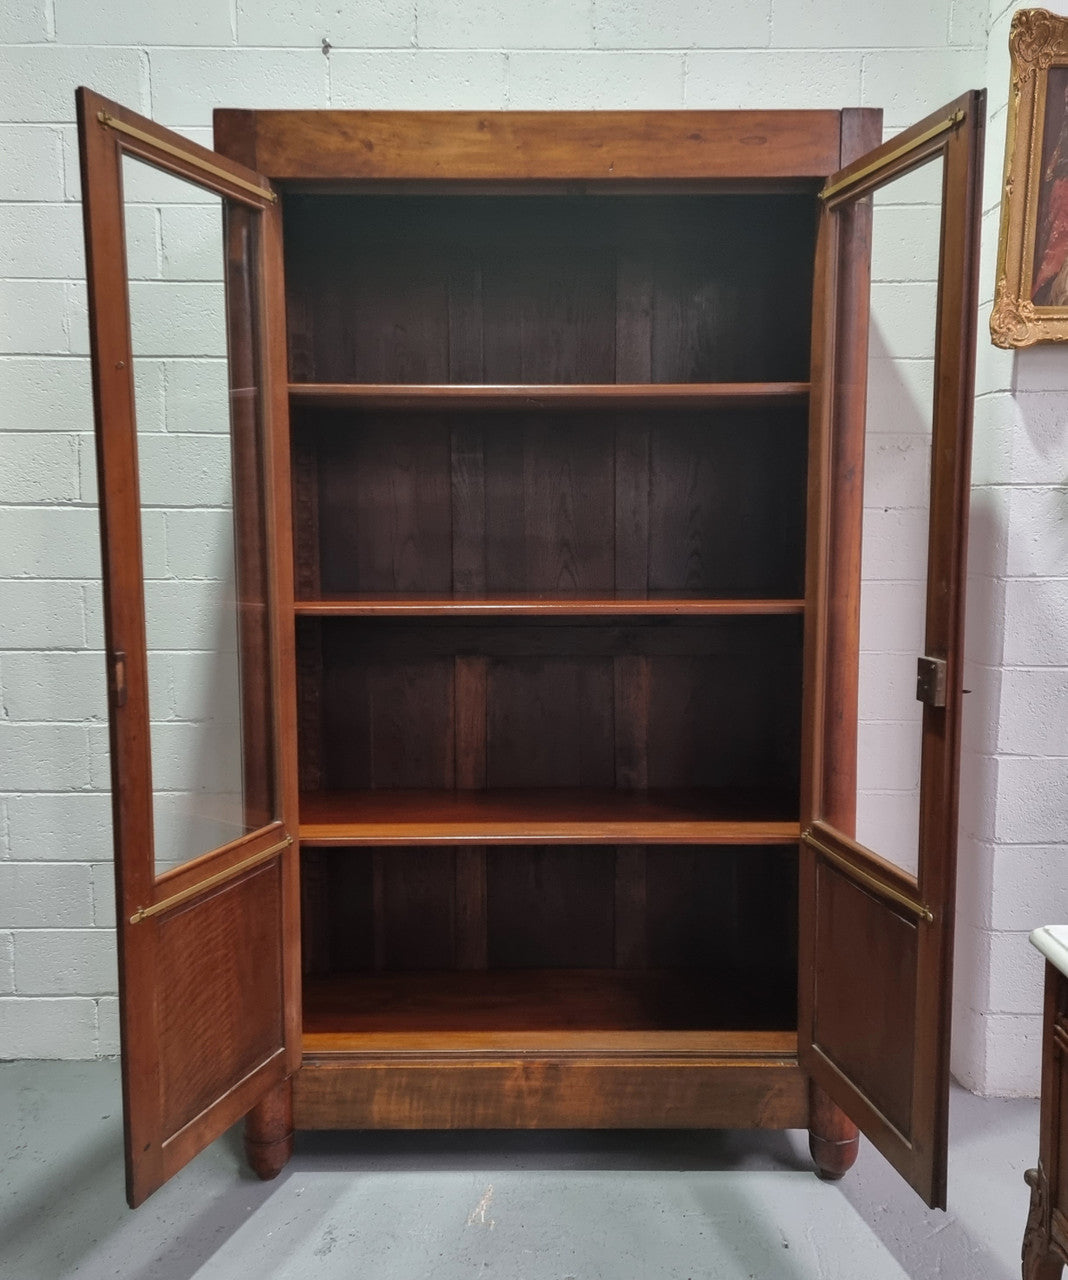 Grand French Mahogany Empire two door bookcase. It has beautiful glass doors and has three fully adjustable shelves. It has been sourced from France and is in good original detailed condition..